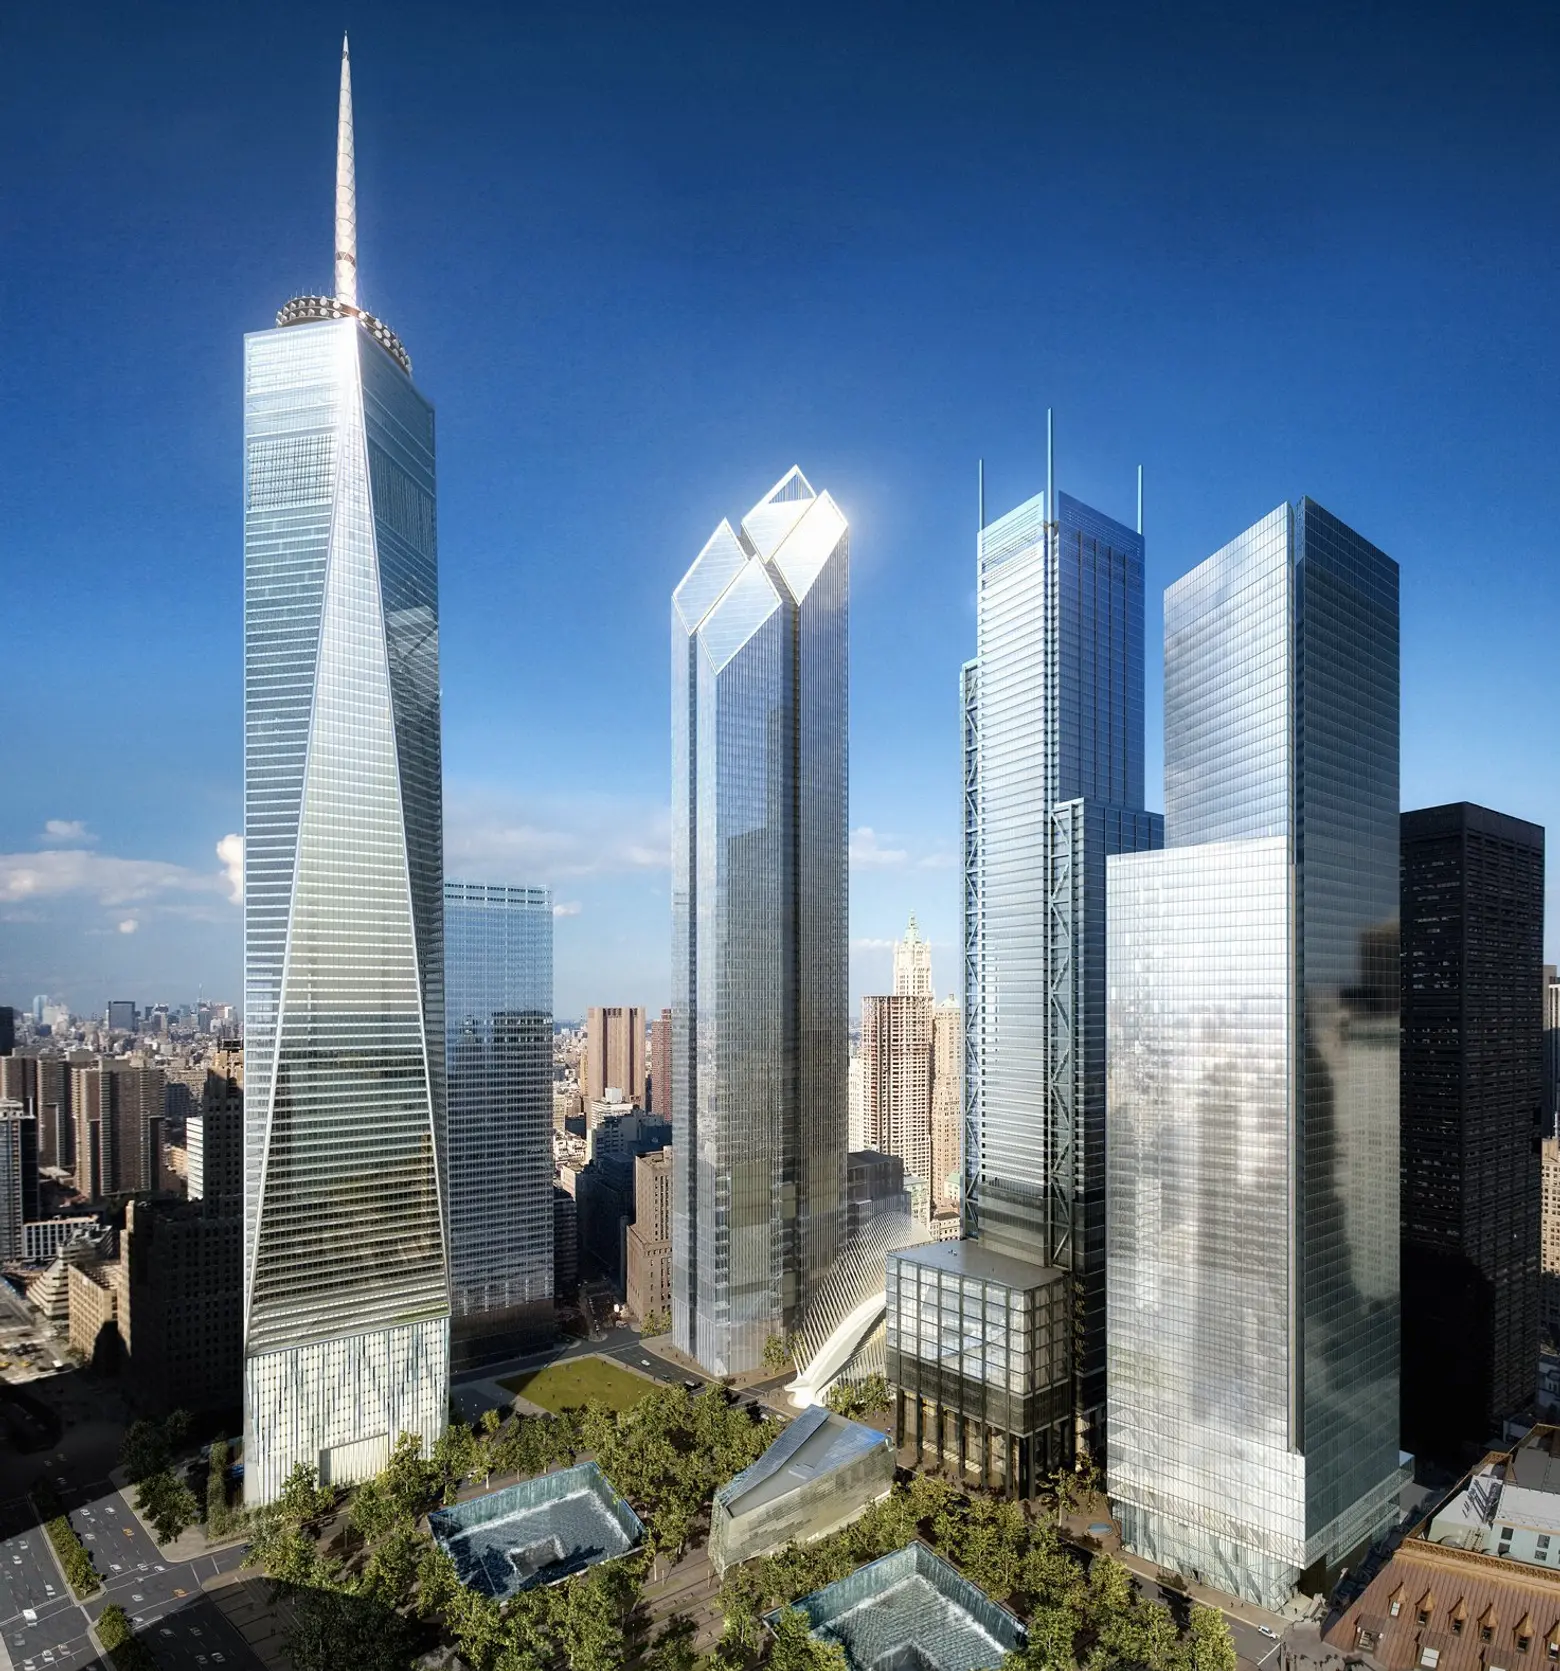 The World Trade Center redevelopment plan, viewed from the southwest, in 2006 with towers by Childs, Foster, Rogers and Maki from left to right